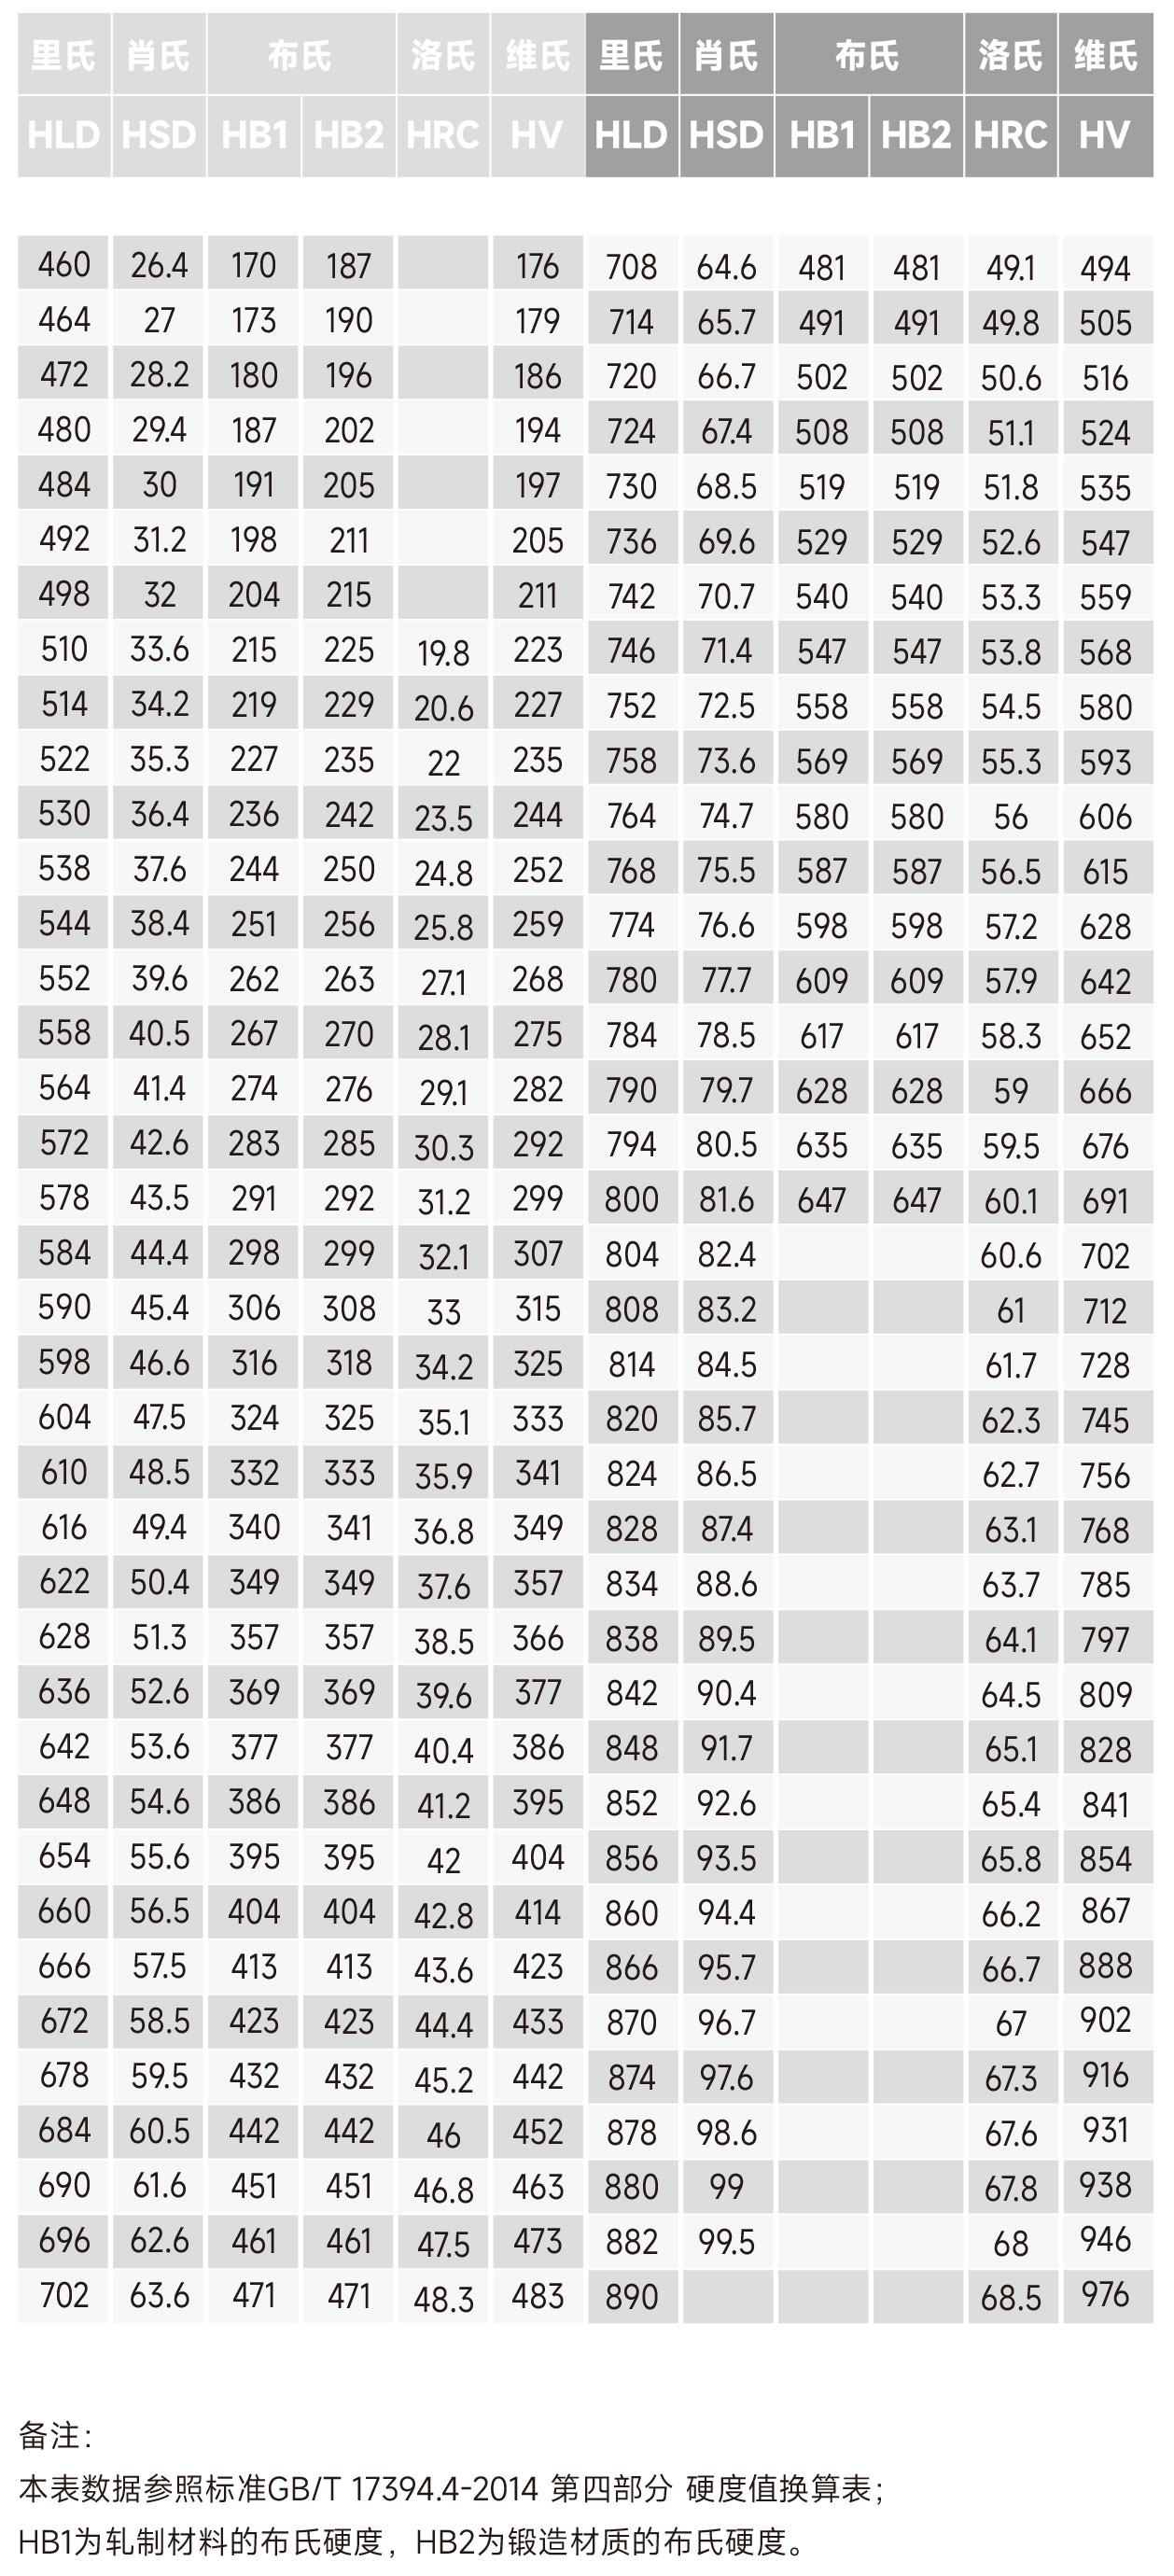 Hardness conversion table and temperature conversion table